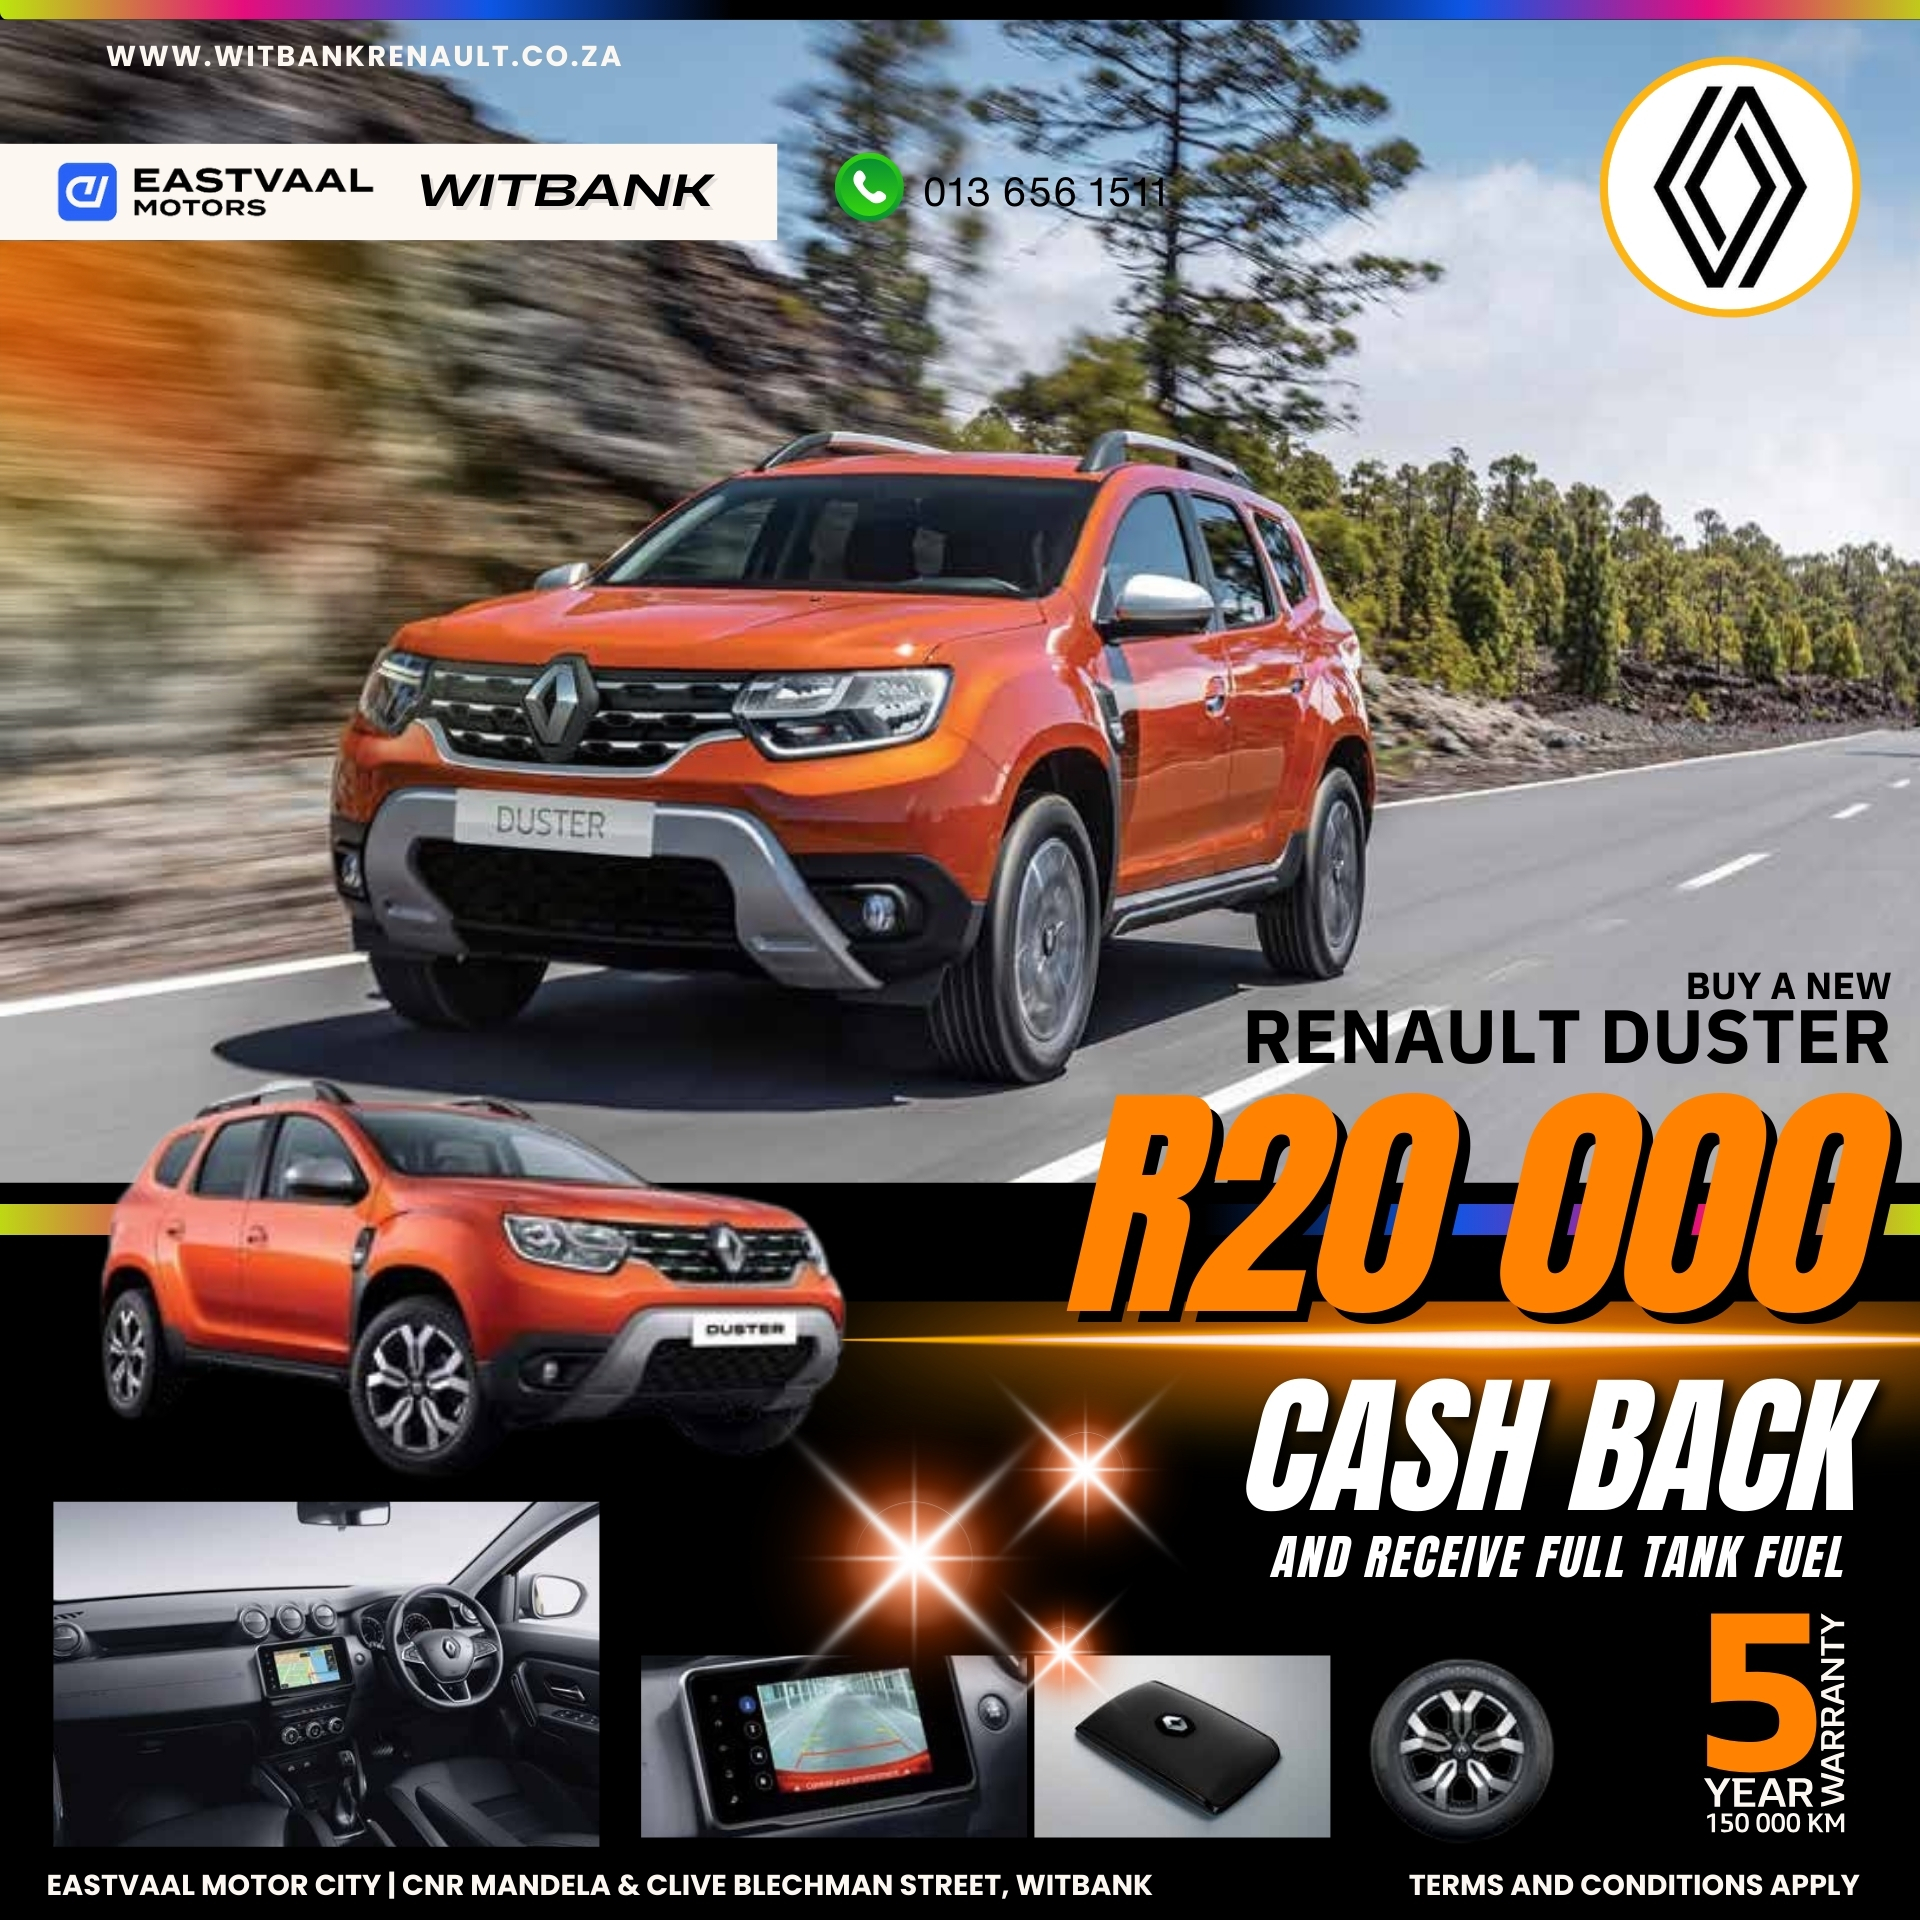 Renault Duster image from 